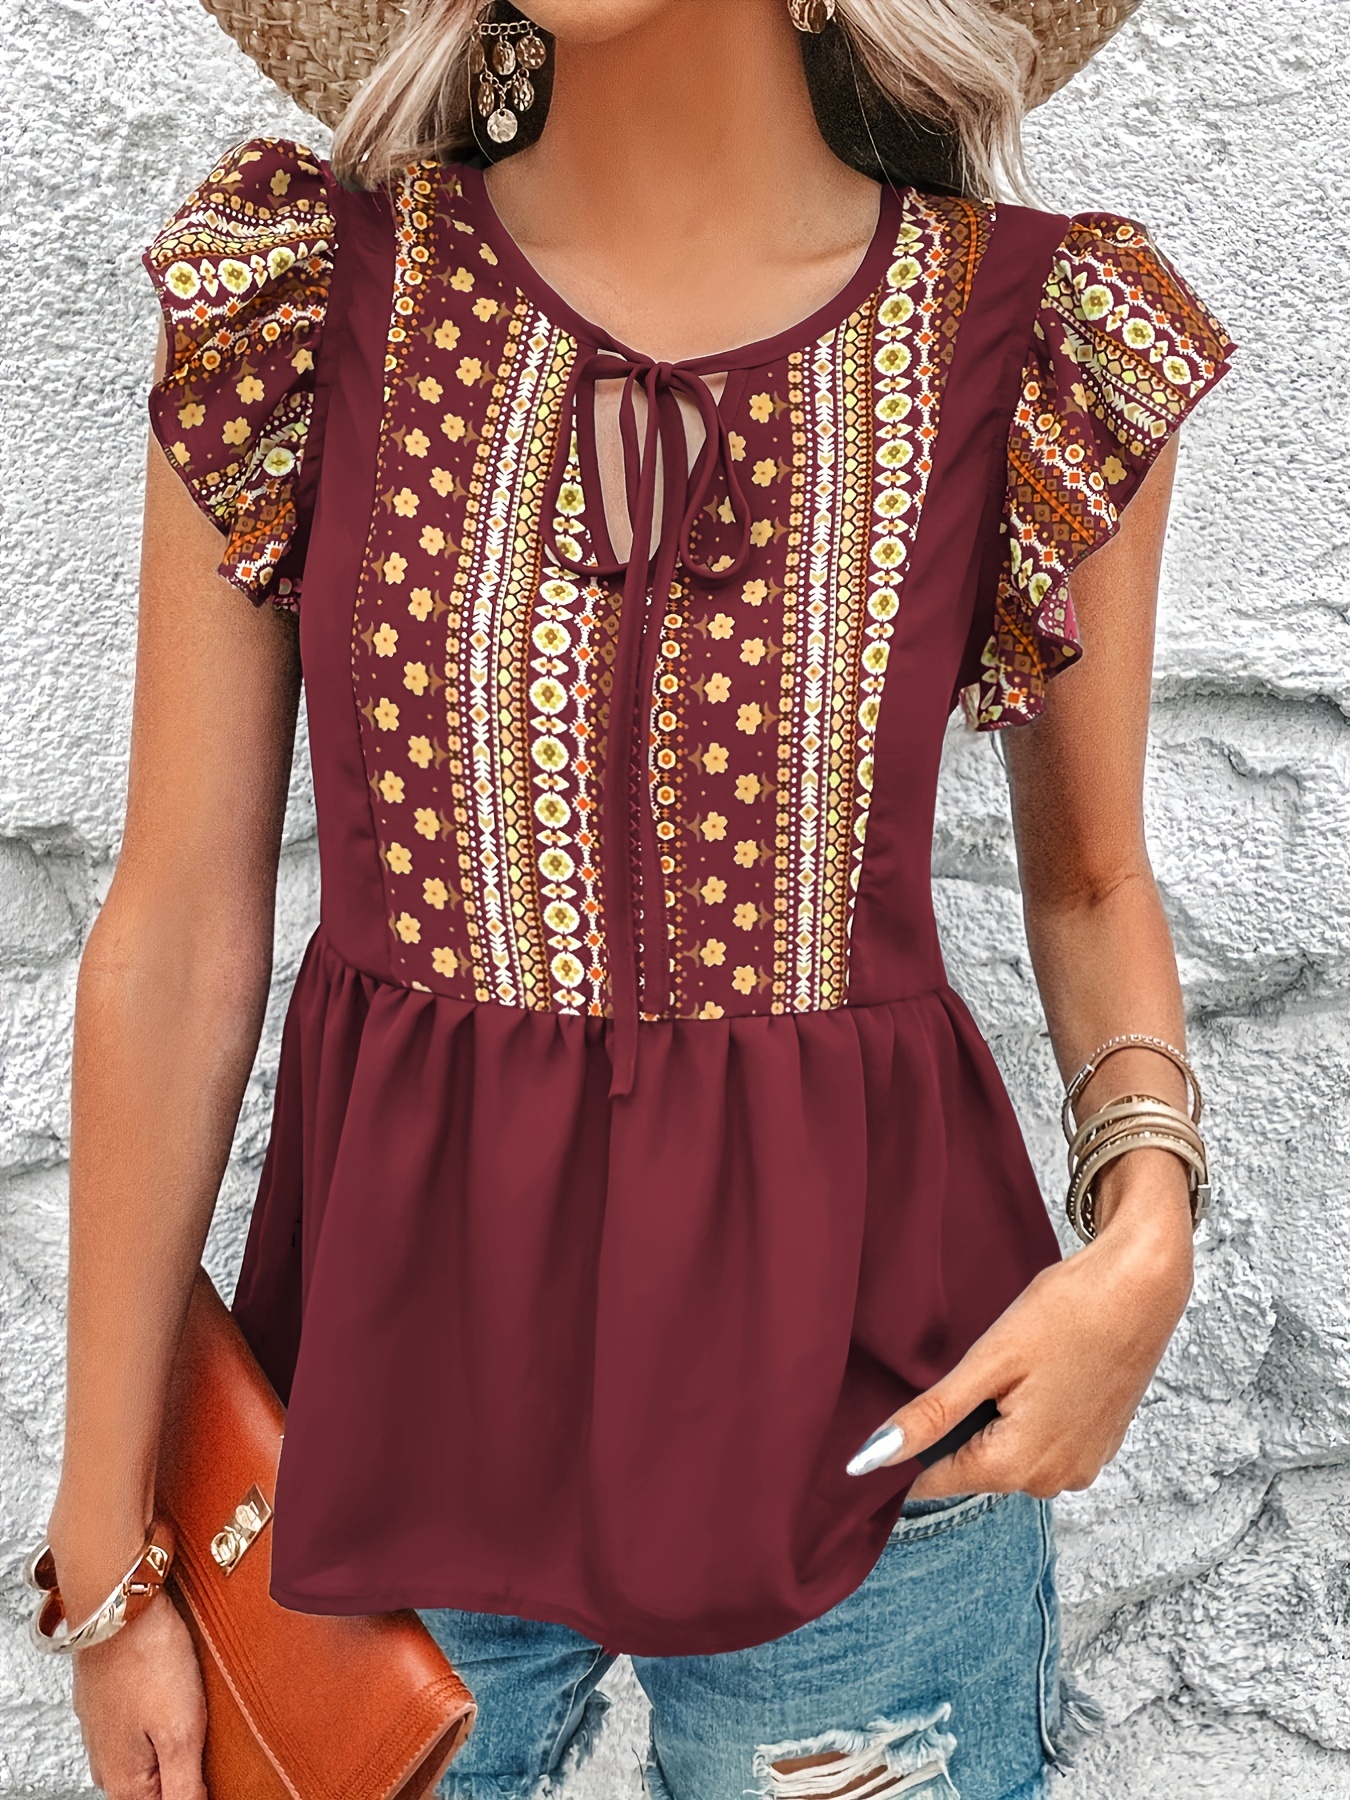 Tribal Print V-neck Loose Blouses, Casual Lace Up Ruffle Flying